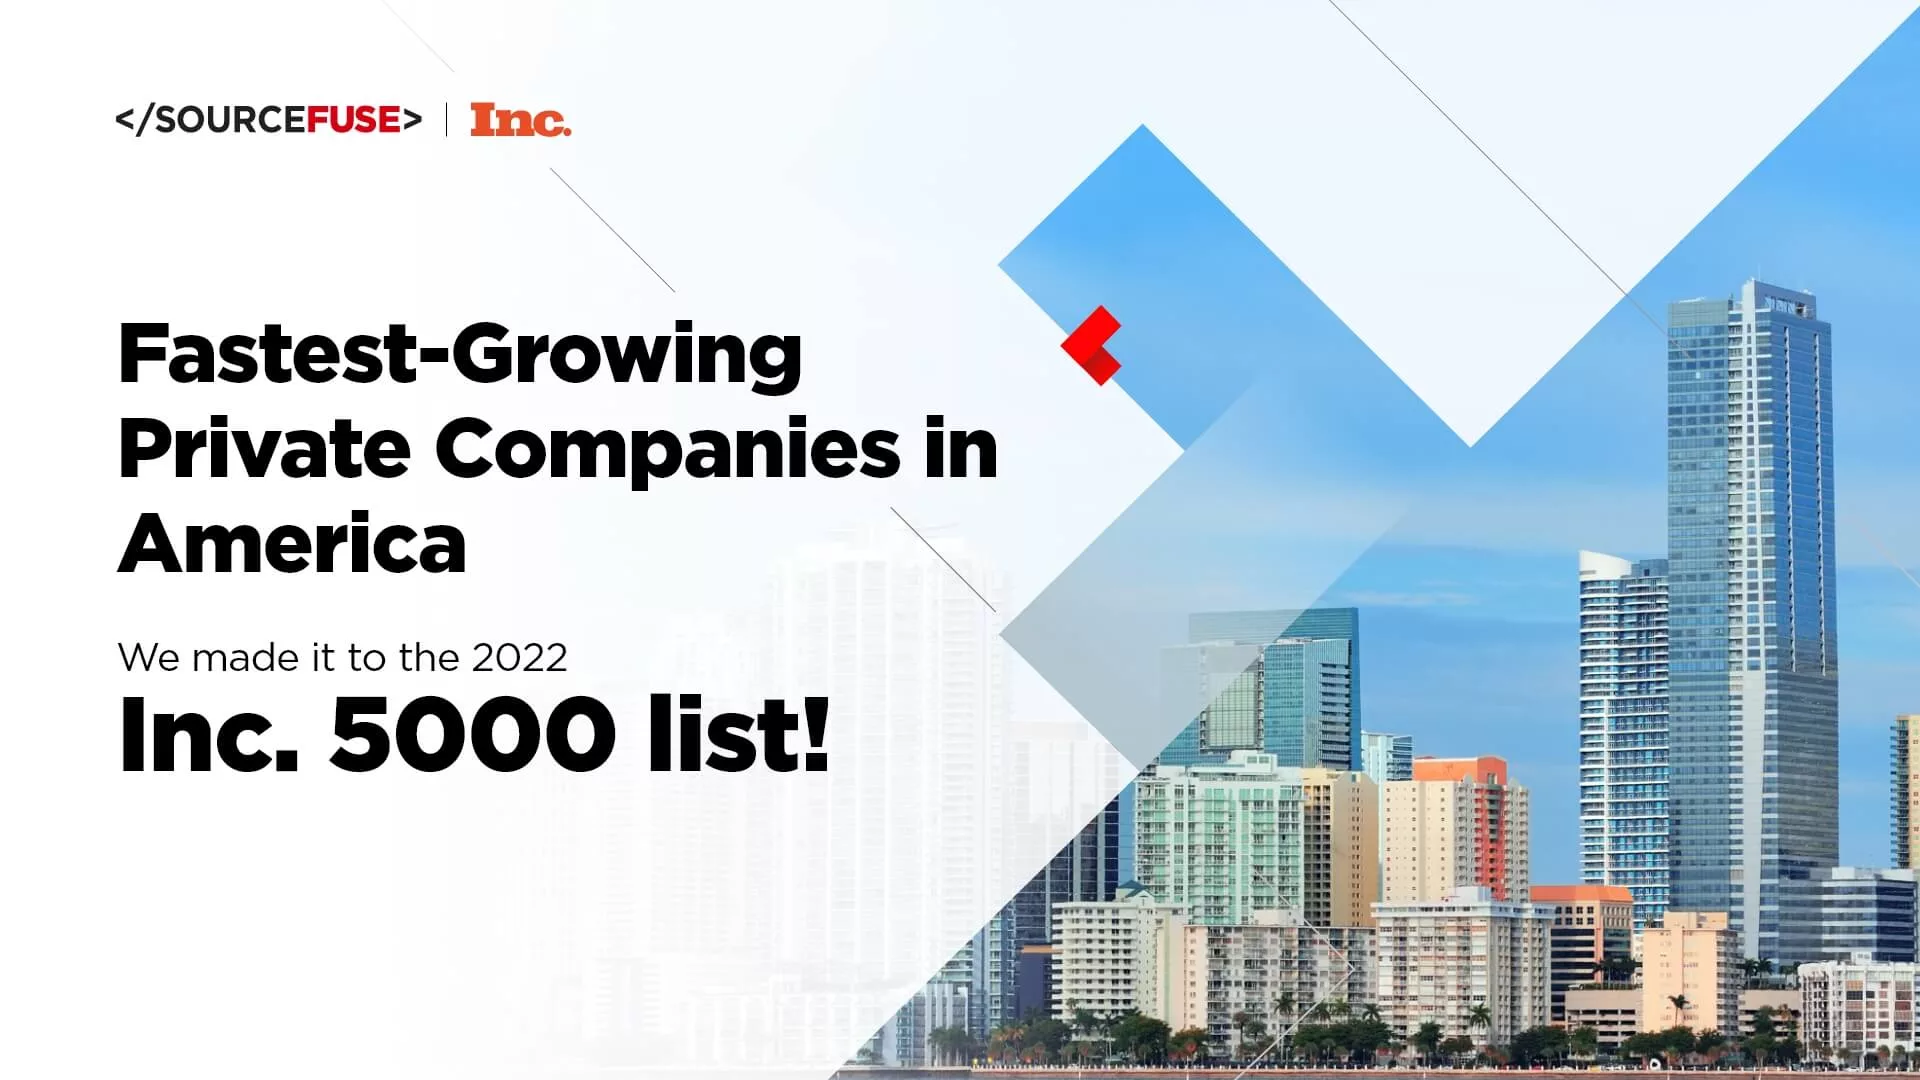 SourceFuse Named as a Fastest Growing Private Company in America for Four Years Running